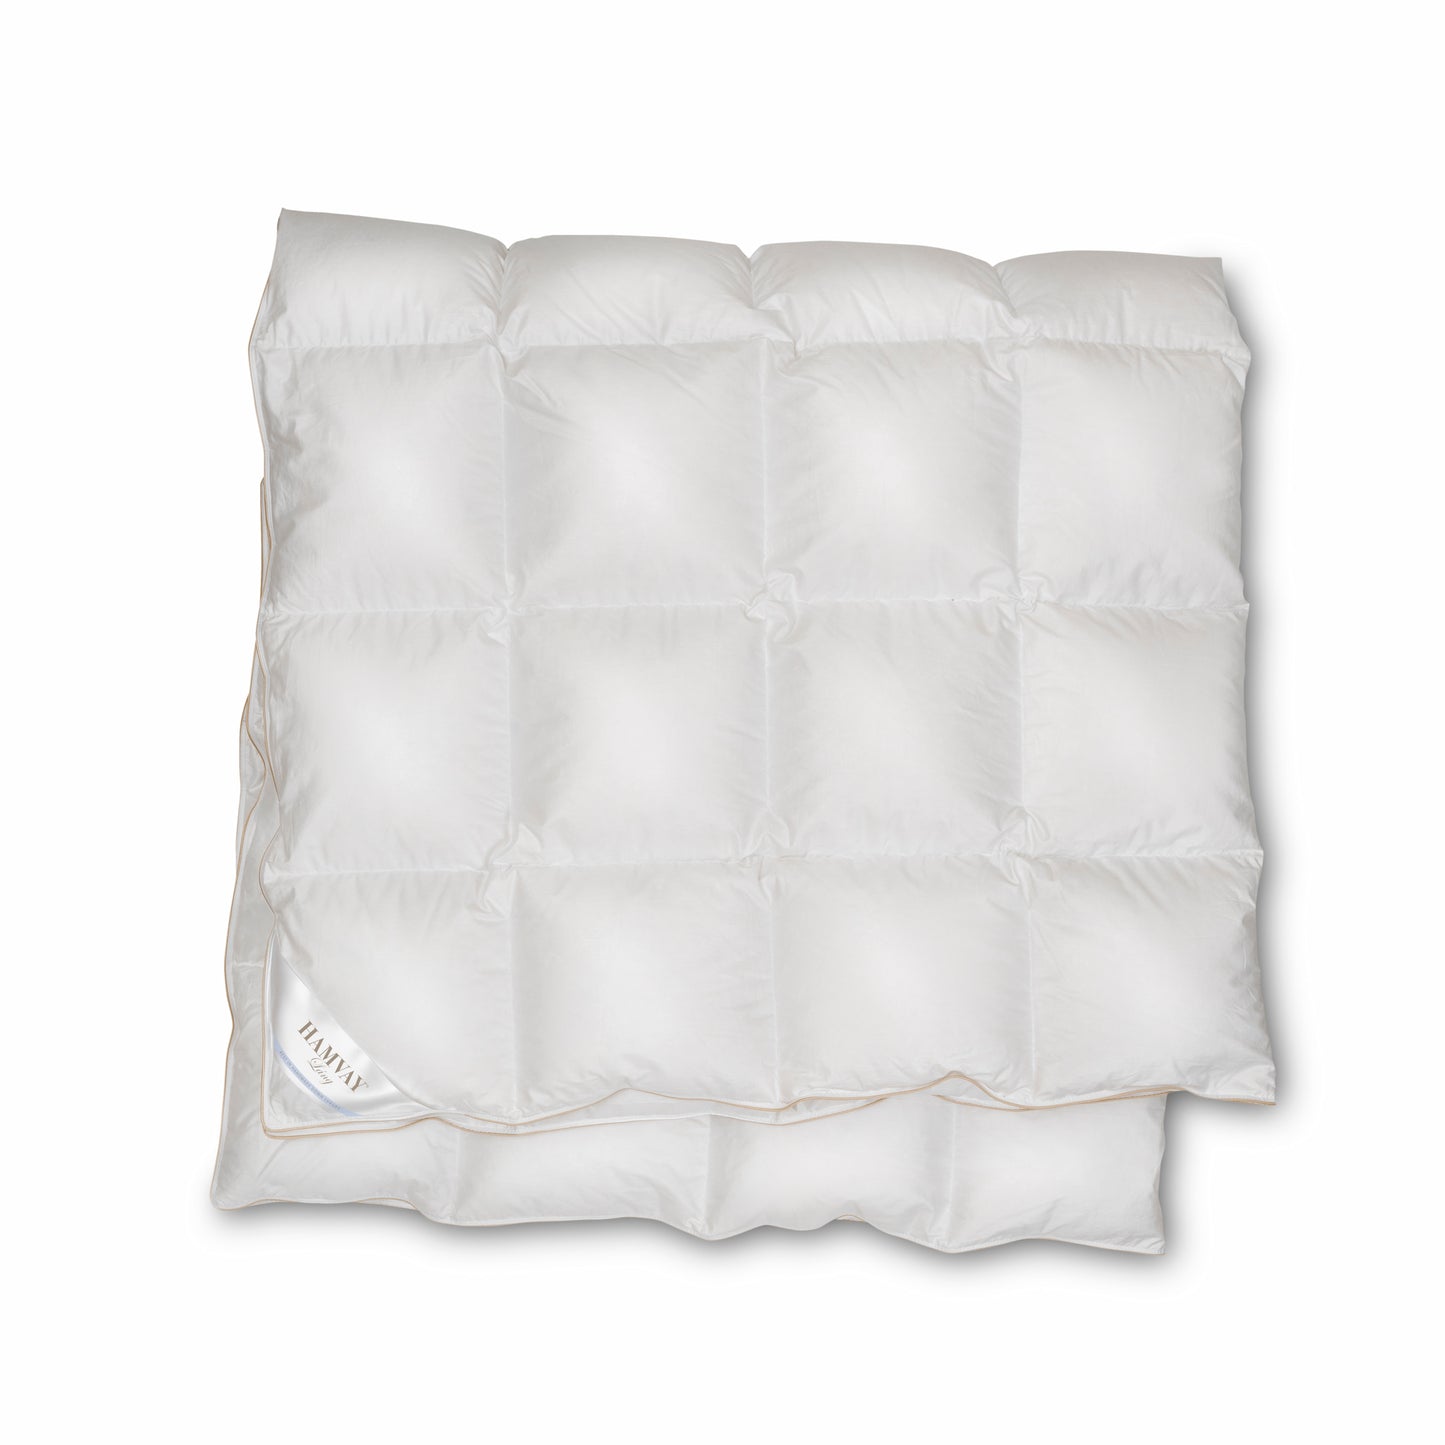 PureDelight king-sized hungarian goose down comforter